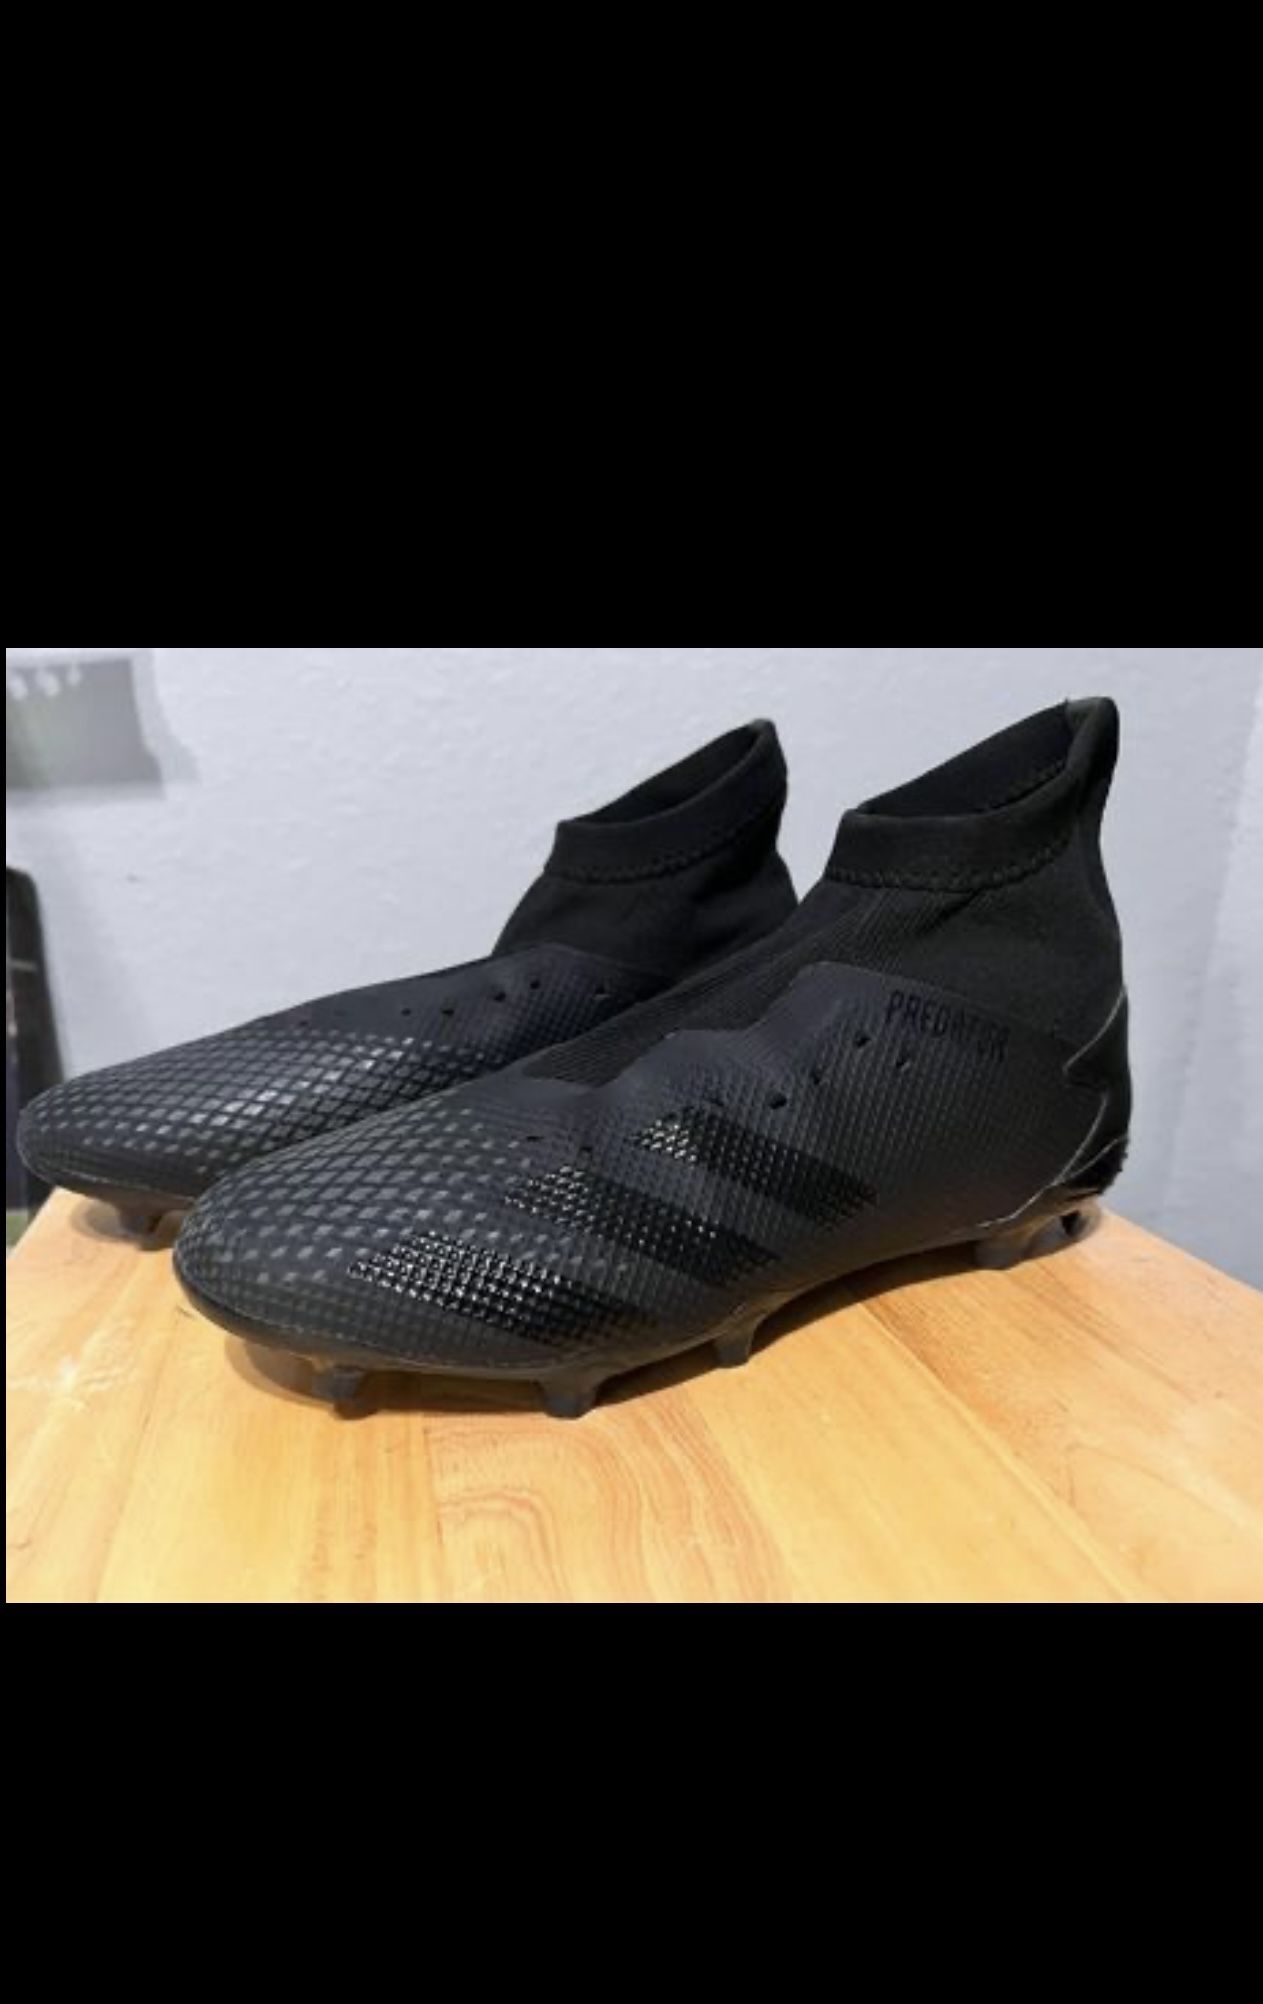 Soccer Cleats Size 11